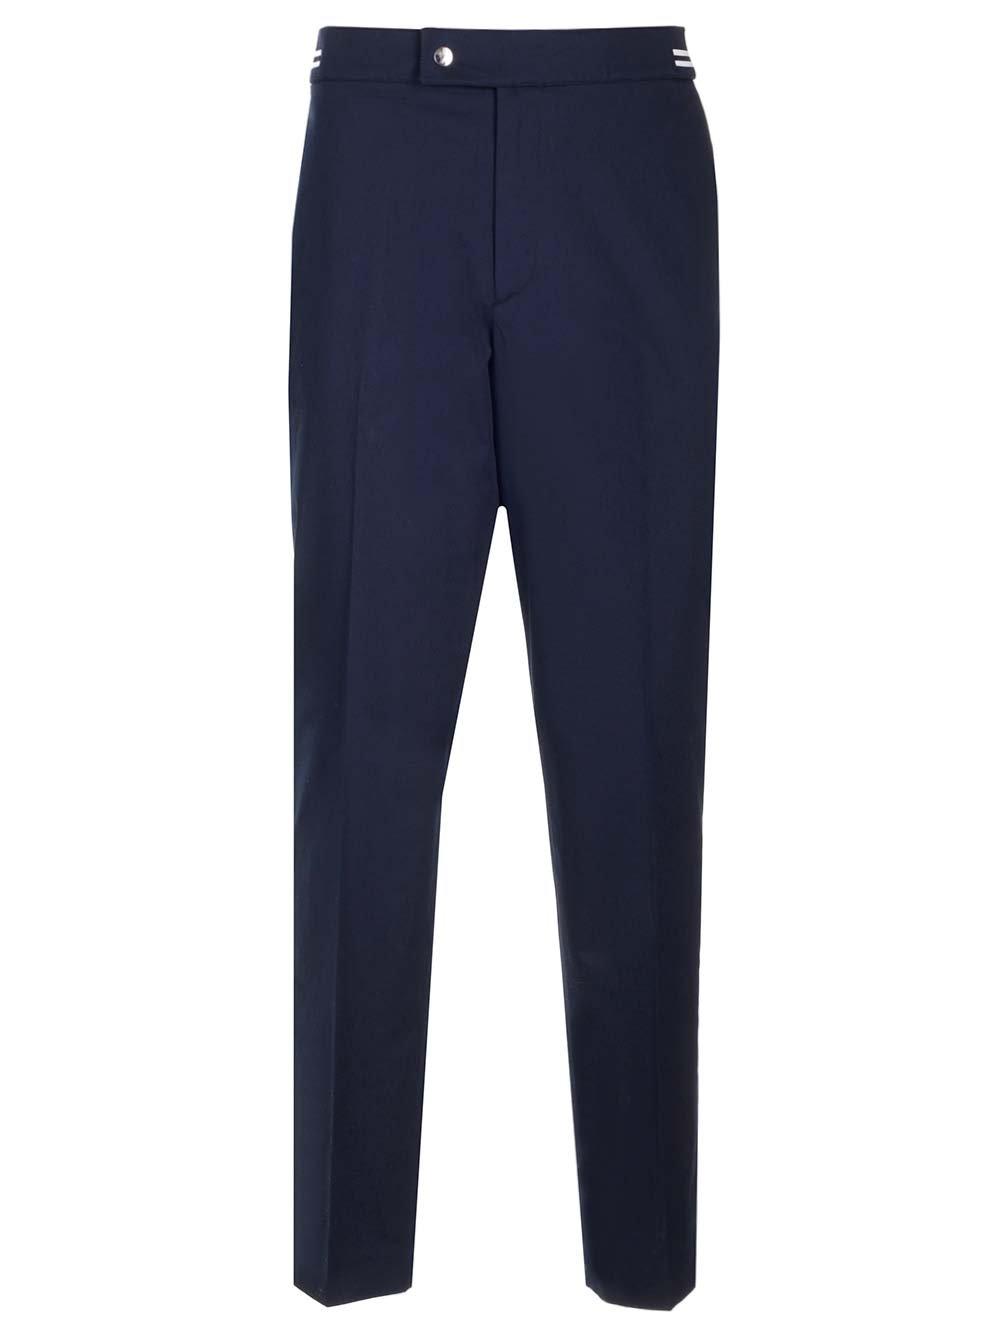 MONCLER GRENOBLE BUTTON DETAILED STRAIGHT-LEG TROUSERS